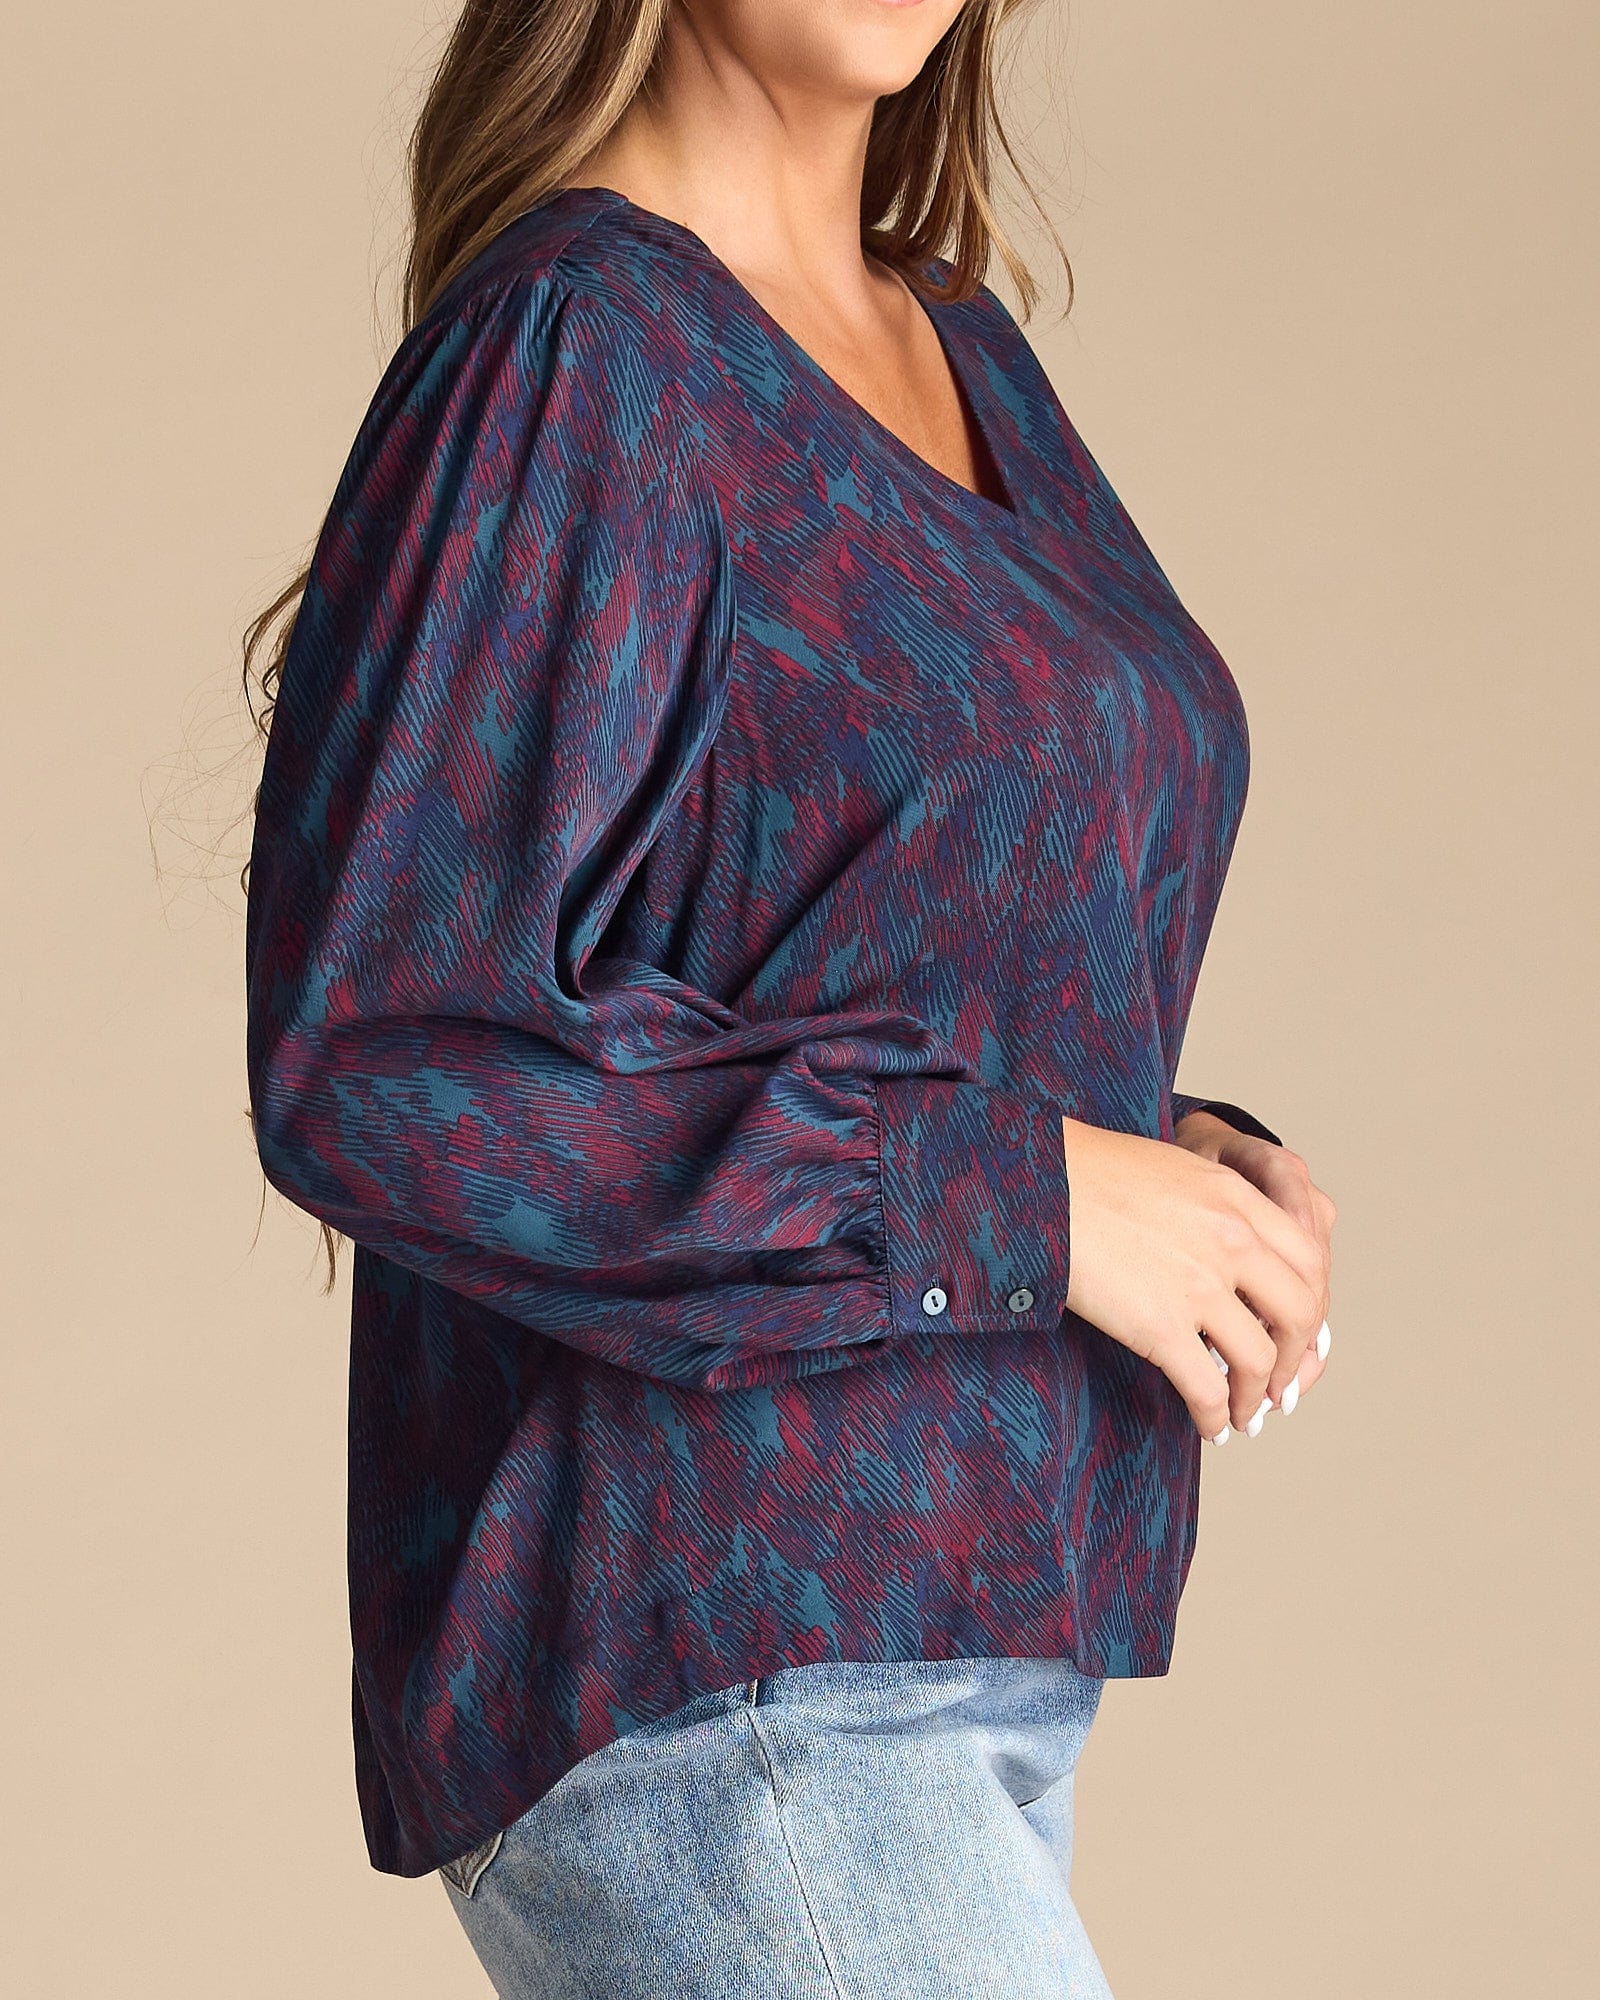 Woman in a blue and purple printed long sleeve blouse